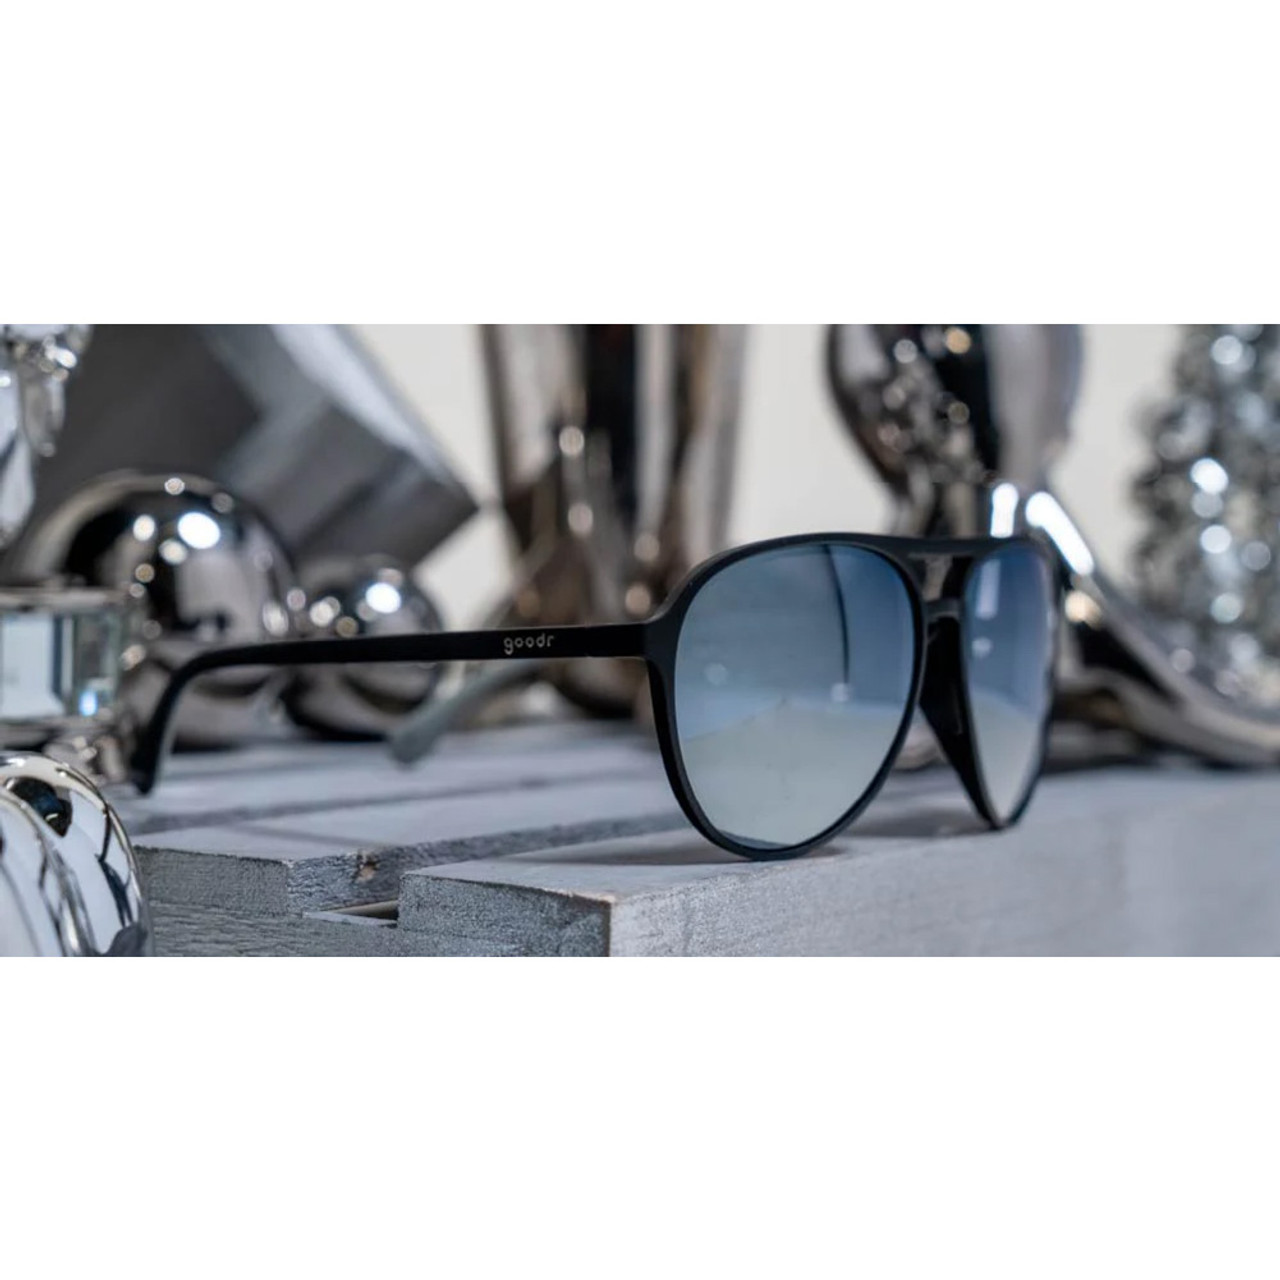 Goodr Mach G Sunglasses (add The Chrome Package)